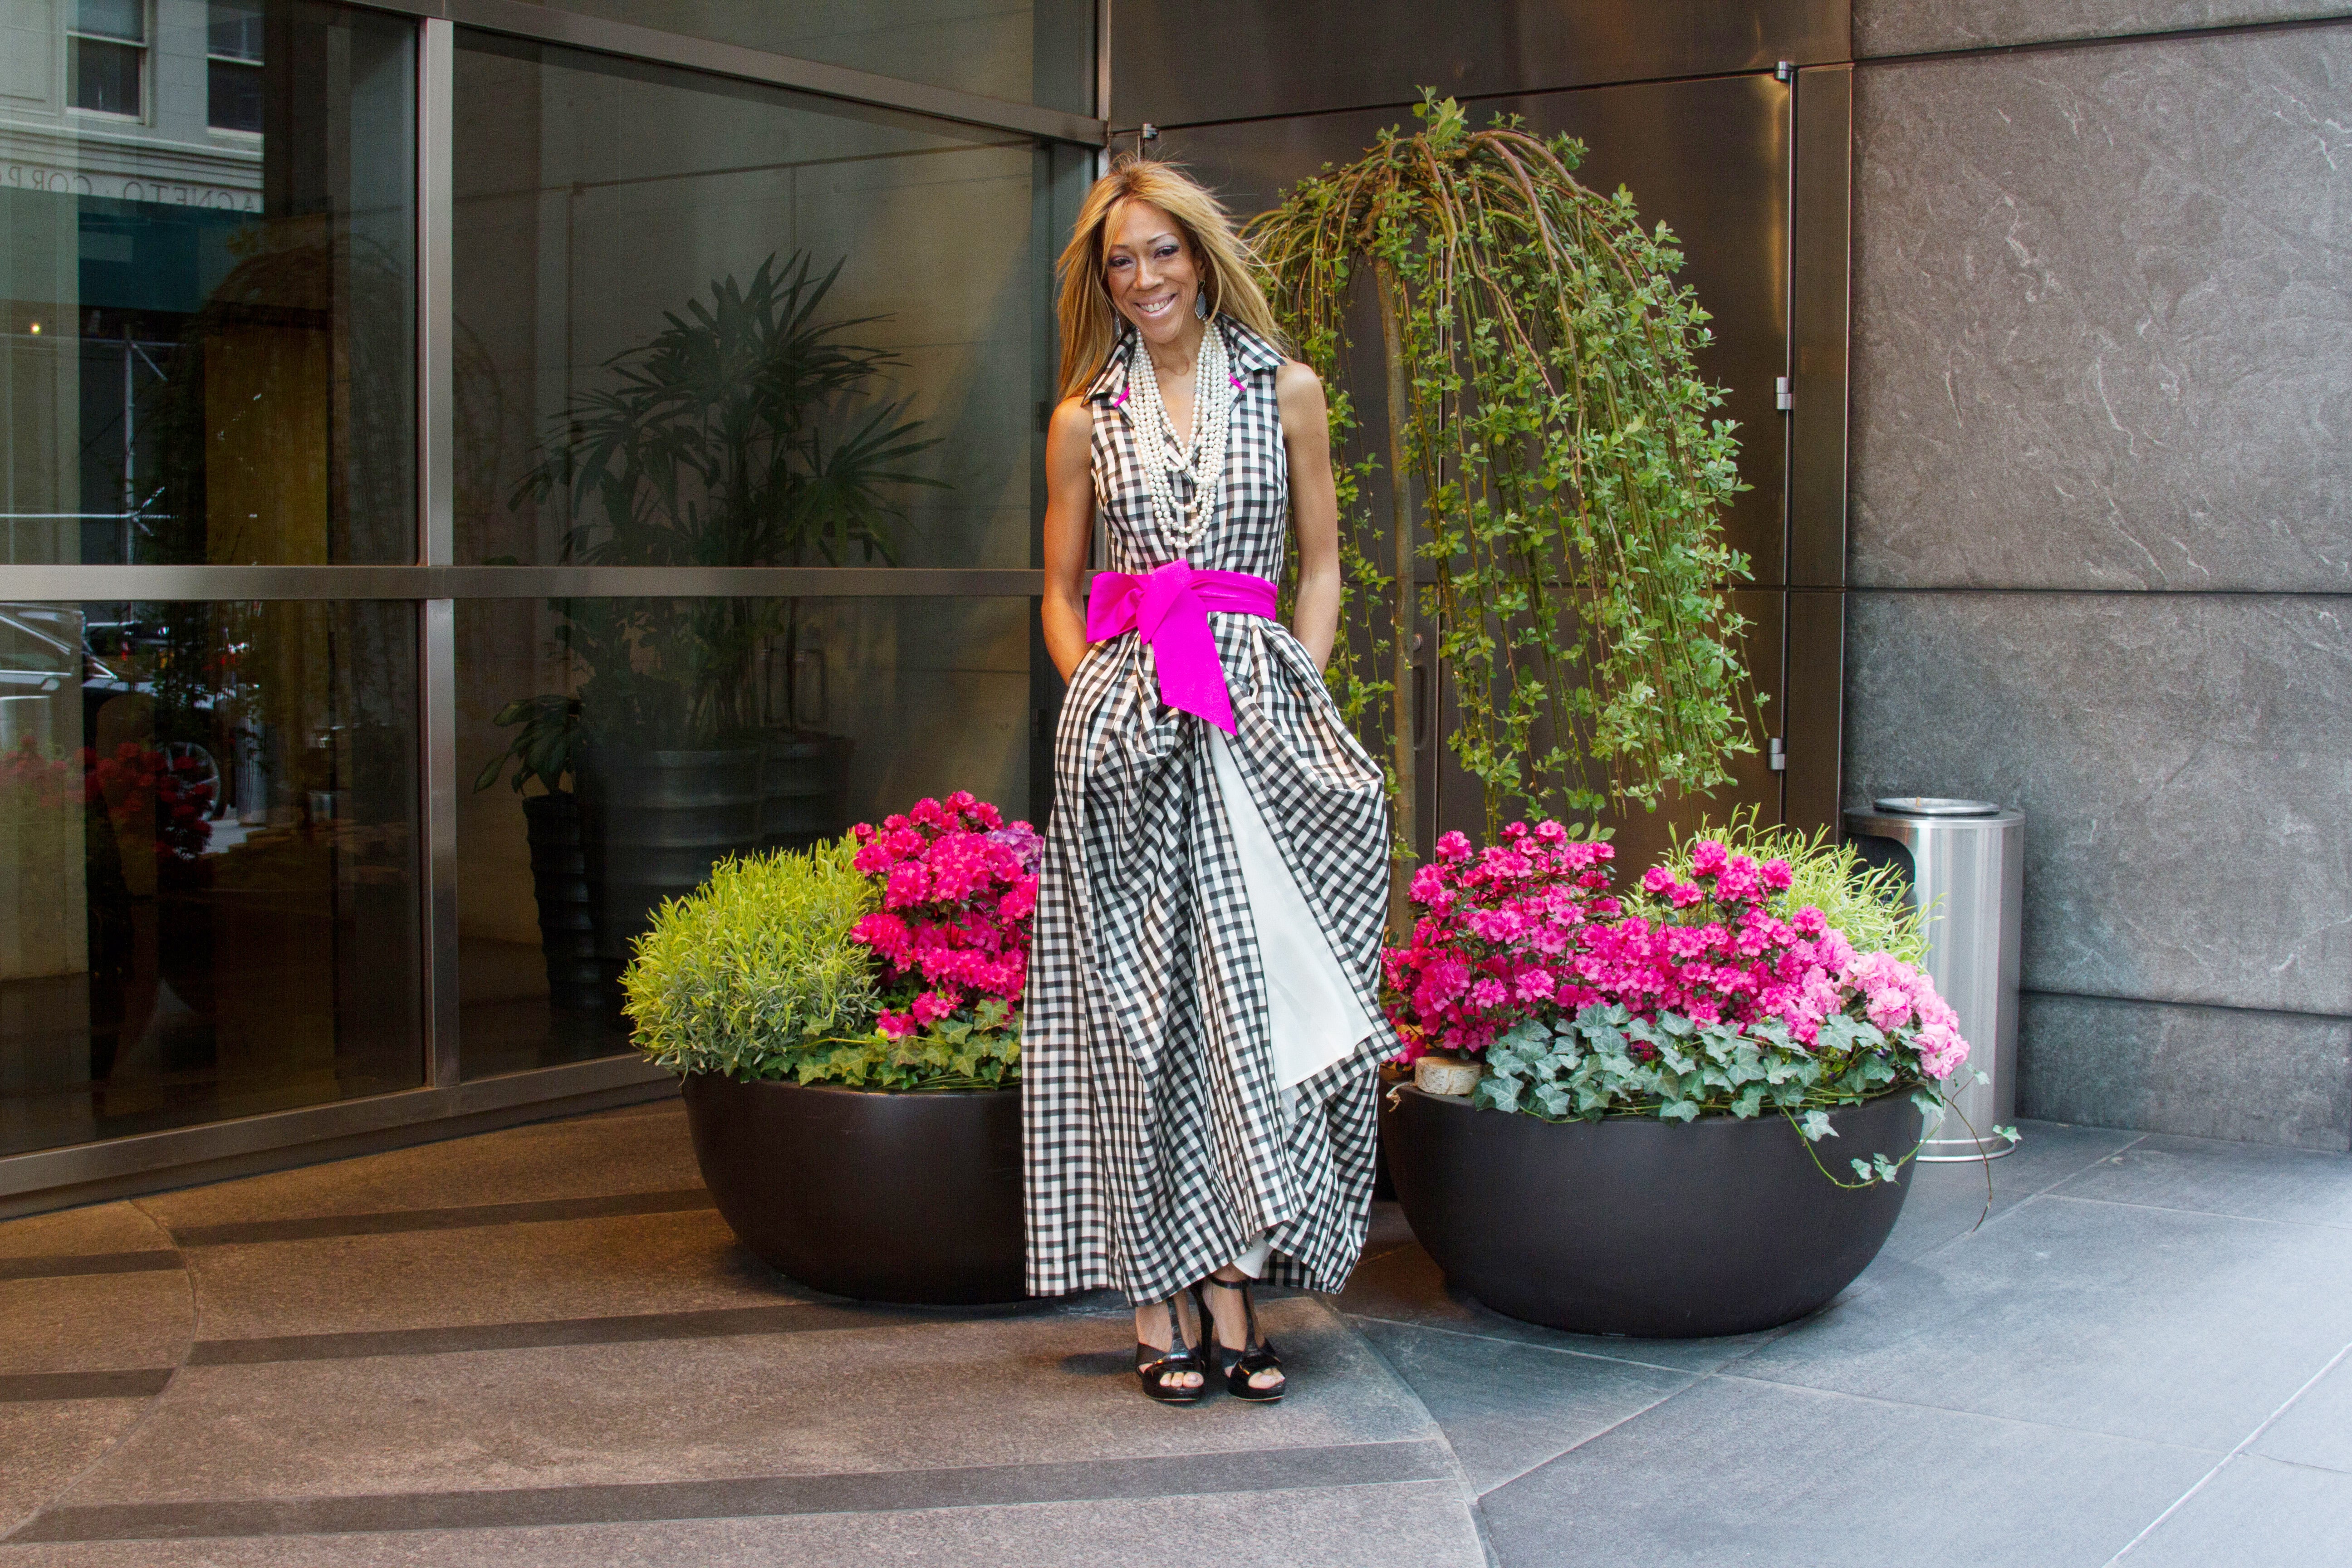 Street Style: Stunning Looks From the Studio Museum Luncheon in Harlem
